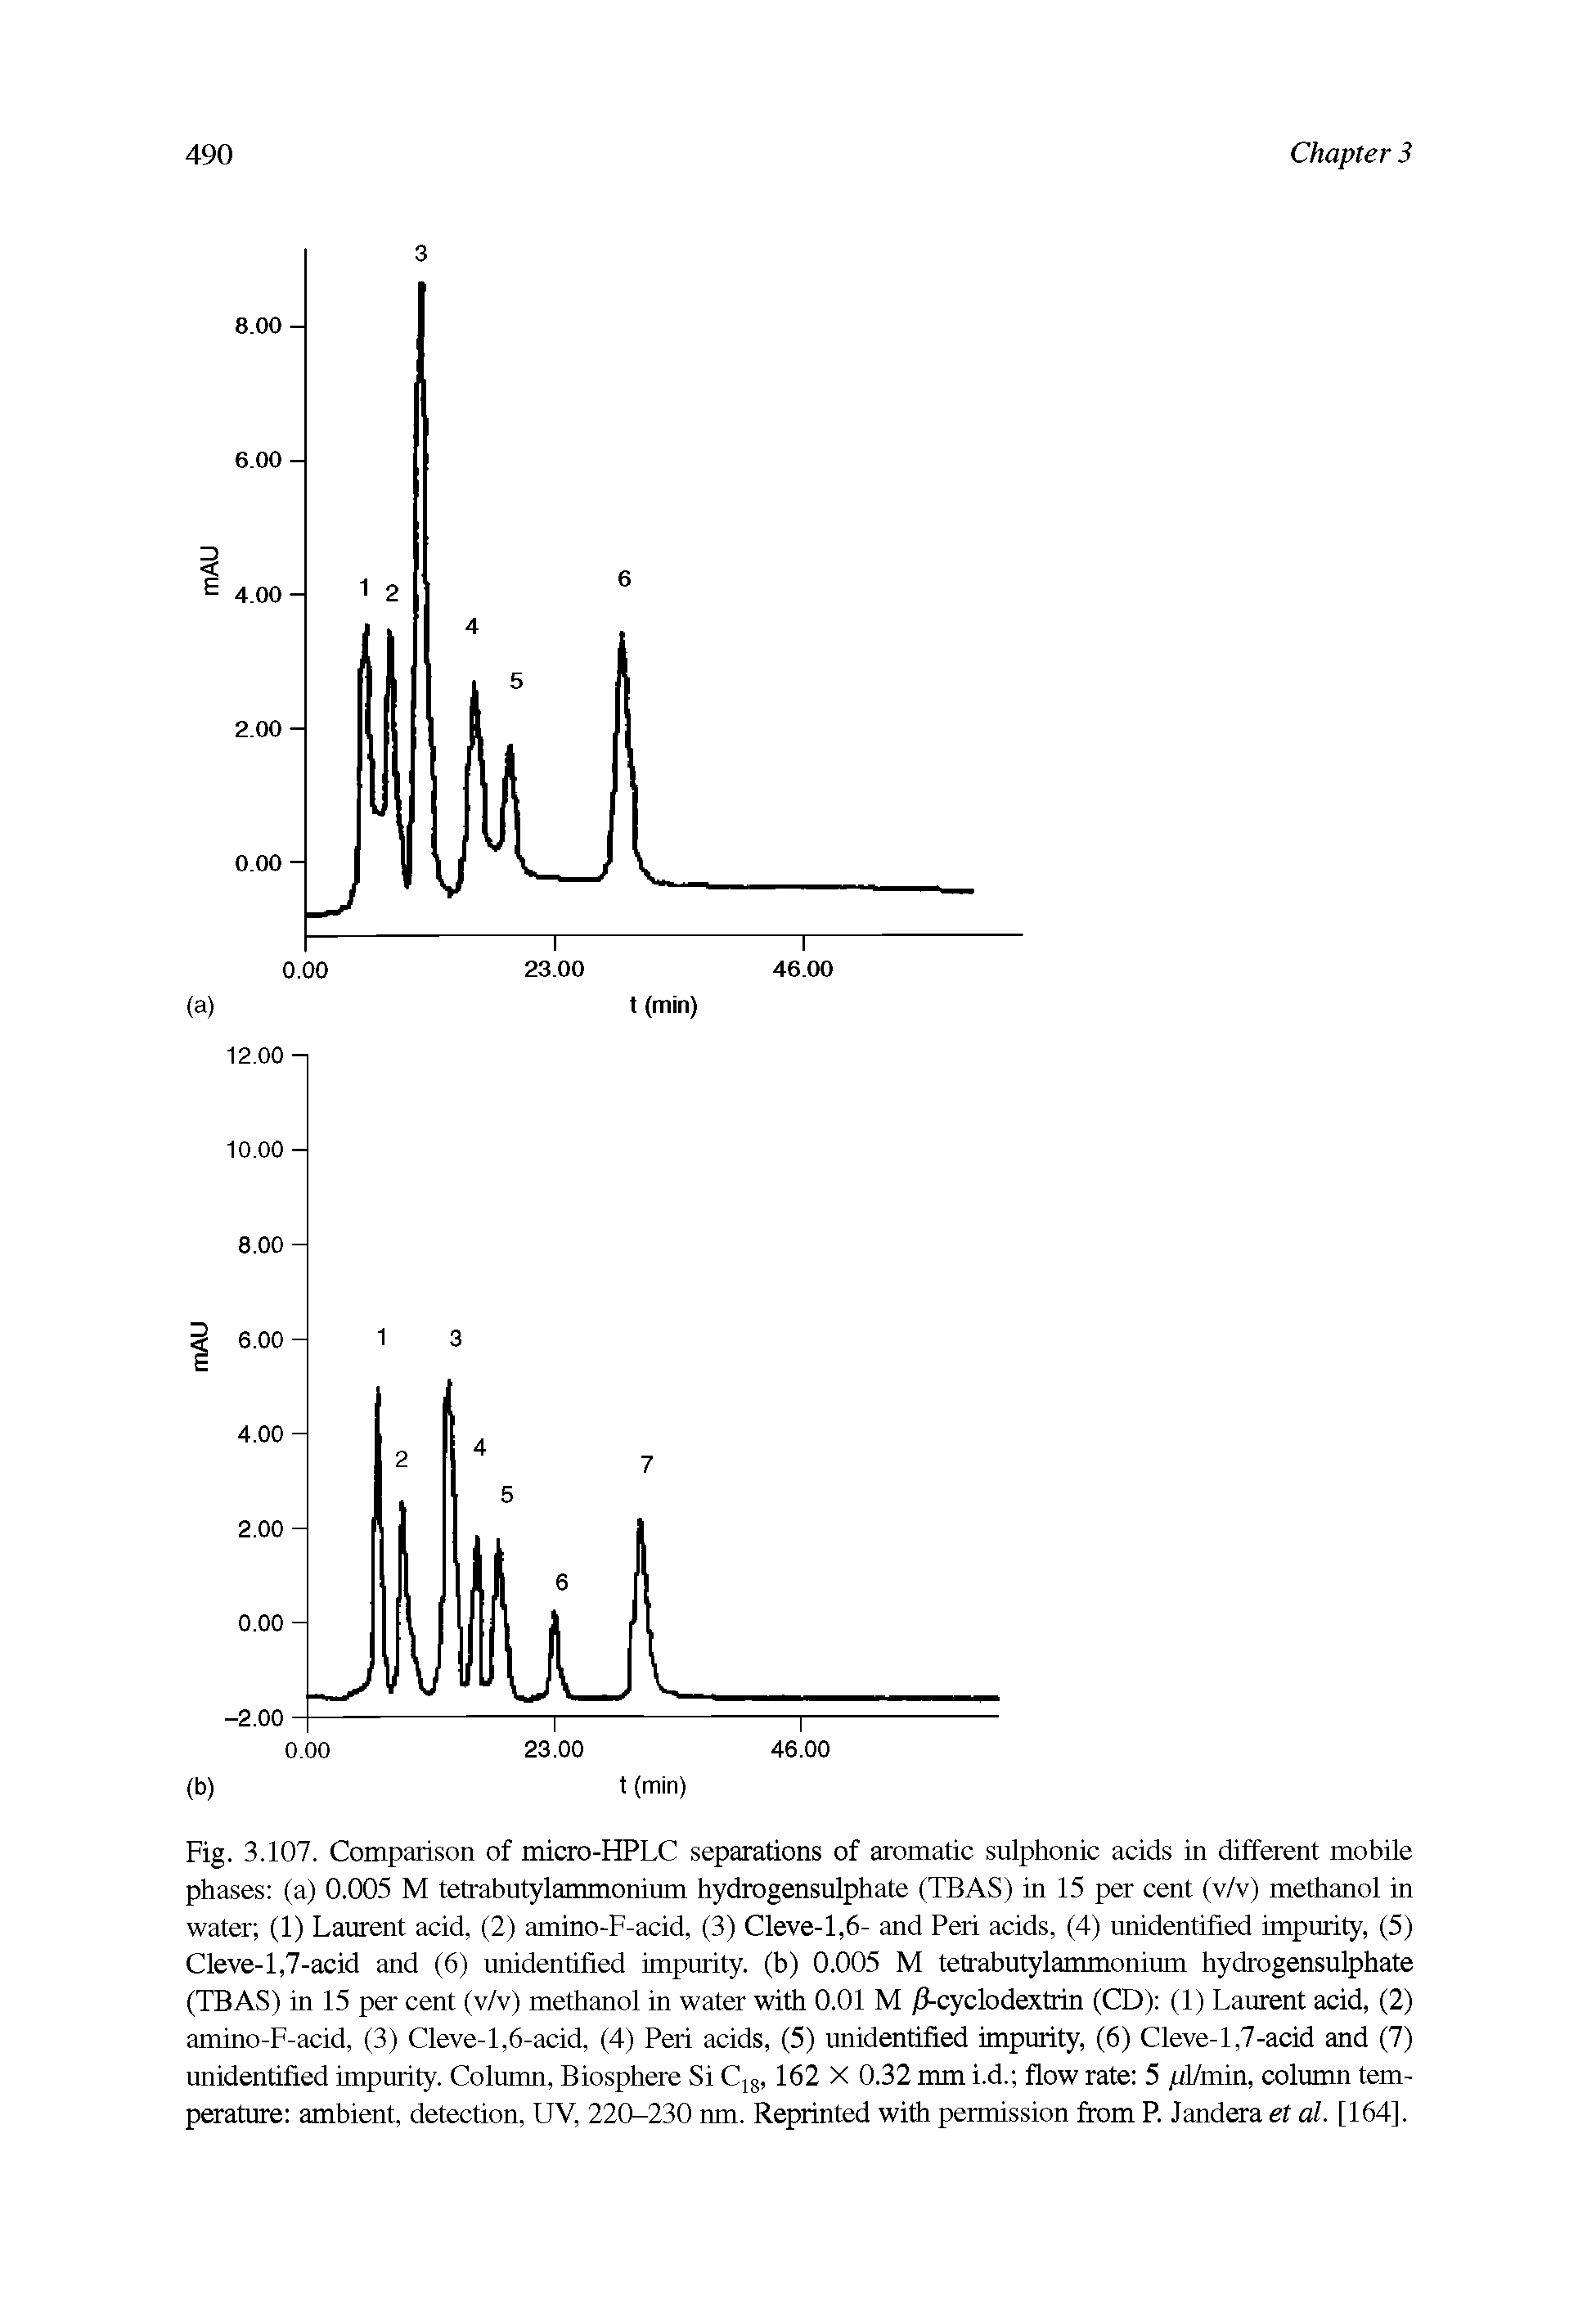 Fig. 3.107. Comparison of micro-HPLC separations of aromatic sulphonic acids in different mobile phases (a) 0.005 M tetrabutylammonium hydrogensulphate (TBAS) in 15 per cent (v/v) methanol in water (1) Laurent acid, (2) amino-F-acid, (3) Cleve-1,6- and Peri acids, (4) unidentified impurity, (5) Cleve-1,7-acid and (6) unidentified impurity, (b) 0.005 M tetrabutylammonium hydrogensulphate (TBAS) in 15 per cent (v/v) methanol in water with 0.01 M /Lcyclodextrin (CD) (1) Laurent acid, (2) amino-F-acid, (3) Cleve-1,6-acid, (4) Peri acids, (5) unidentified impurity, (6) Cleve-1,7-acid and (7) unidentified impurity. Column, Biosphere Si C18, 162 X 0.32 mm i.d. flow rate 5 pl/min, column temperature ambient, detection, UV, 220-230 nm. Reprinted with permission from P. Jandera et al. [164].